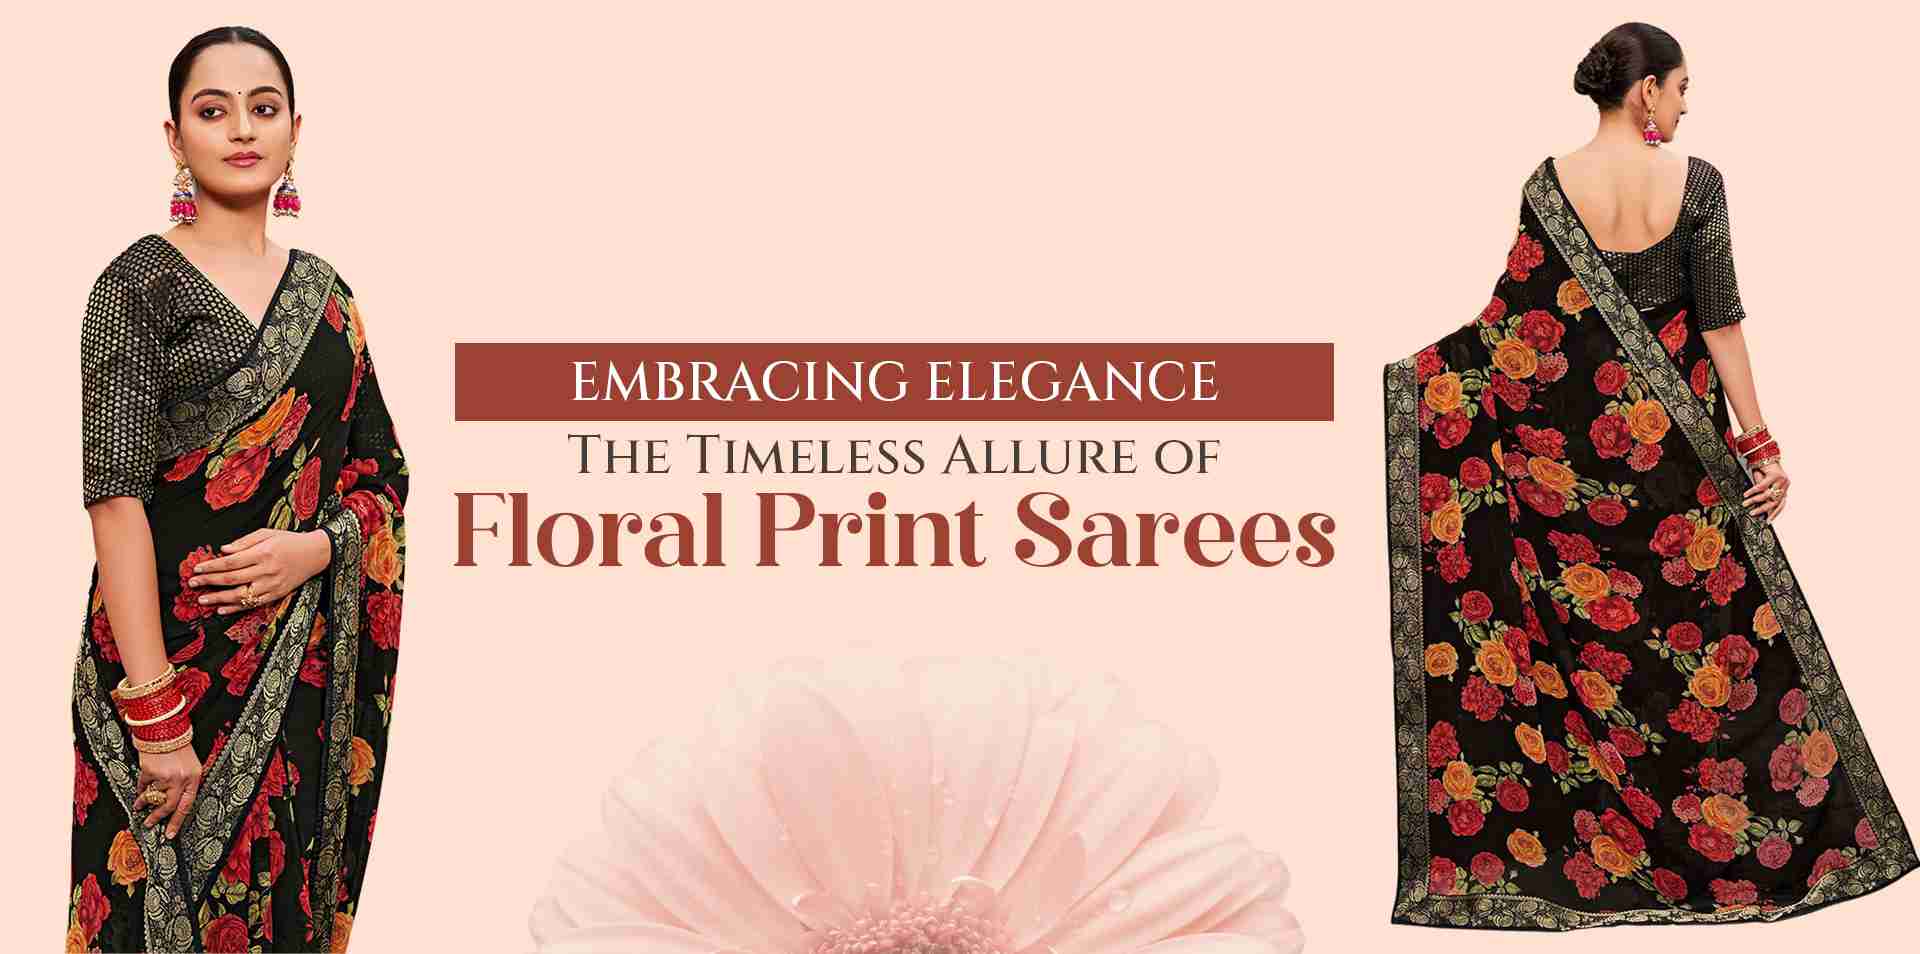 Embracing Elegance: The Timeless Allure of Floral Print Sarees